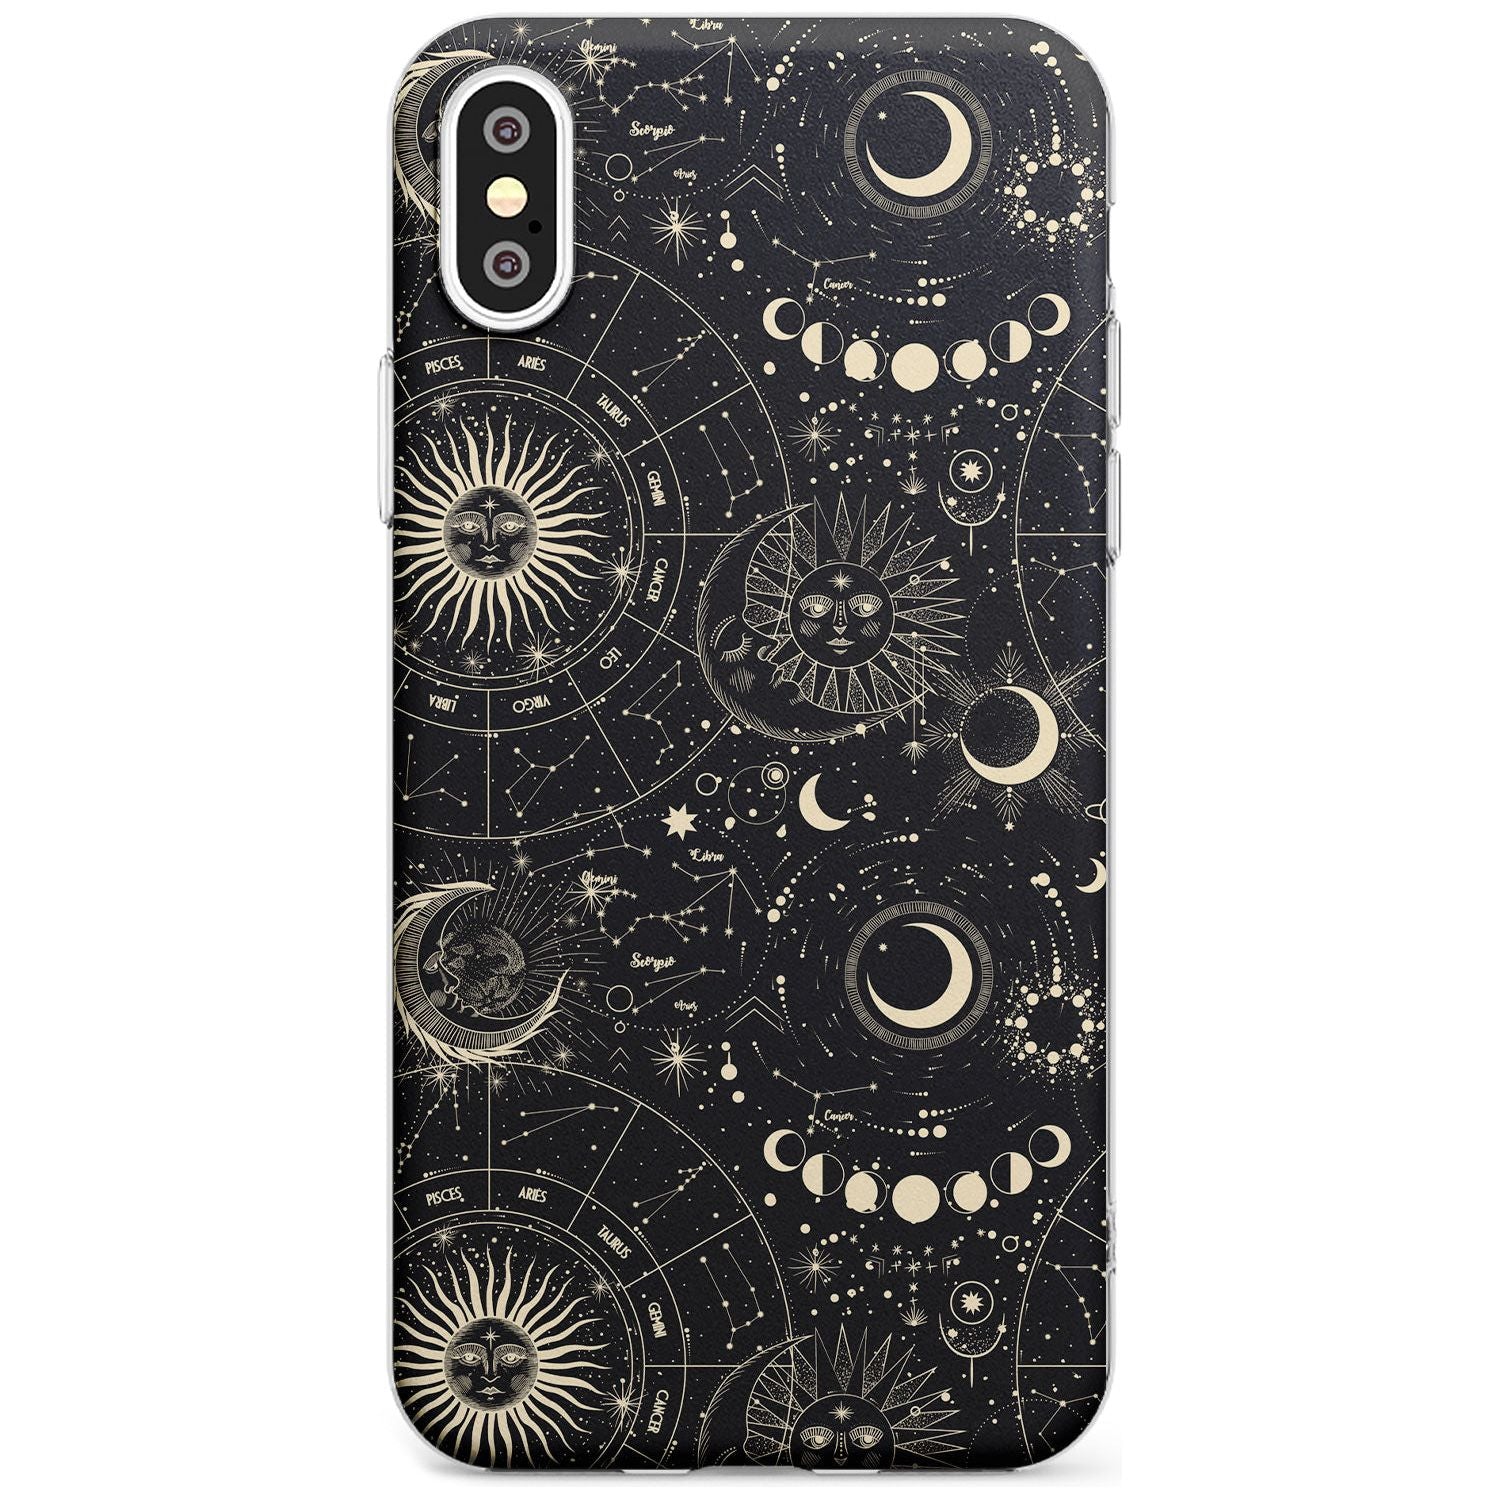 Suns, Moons & Star Signs Black Impact Phone Case for iPhone X XS Max XR